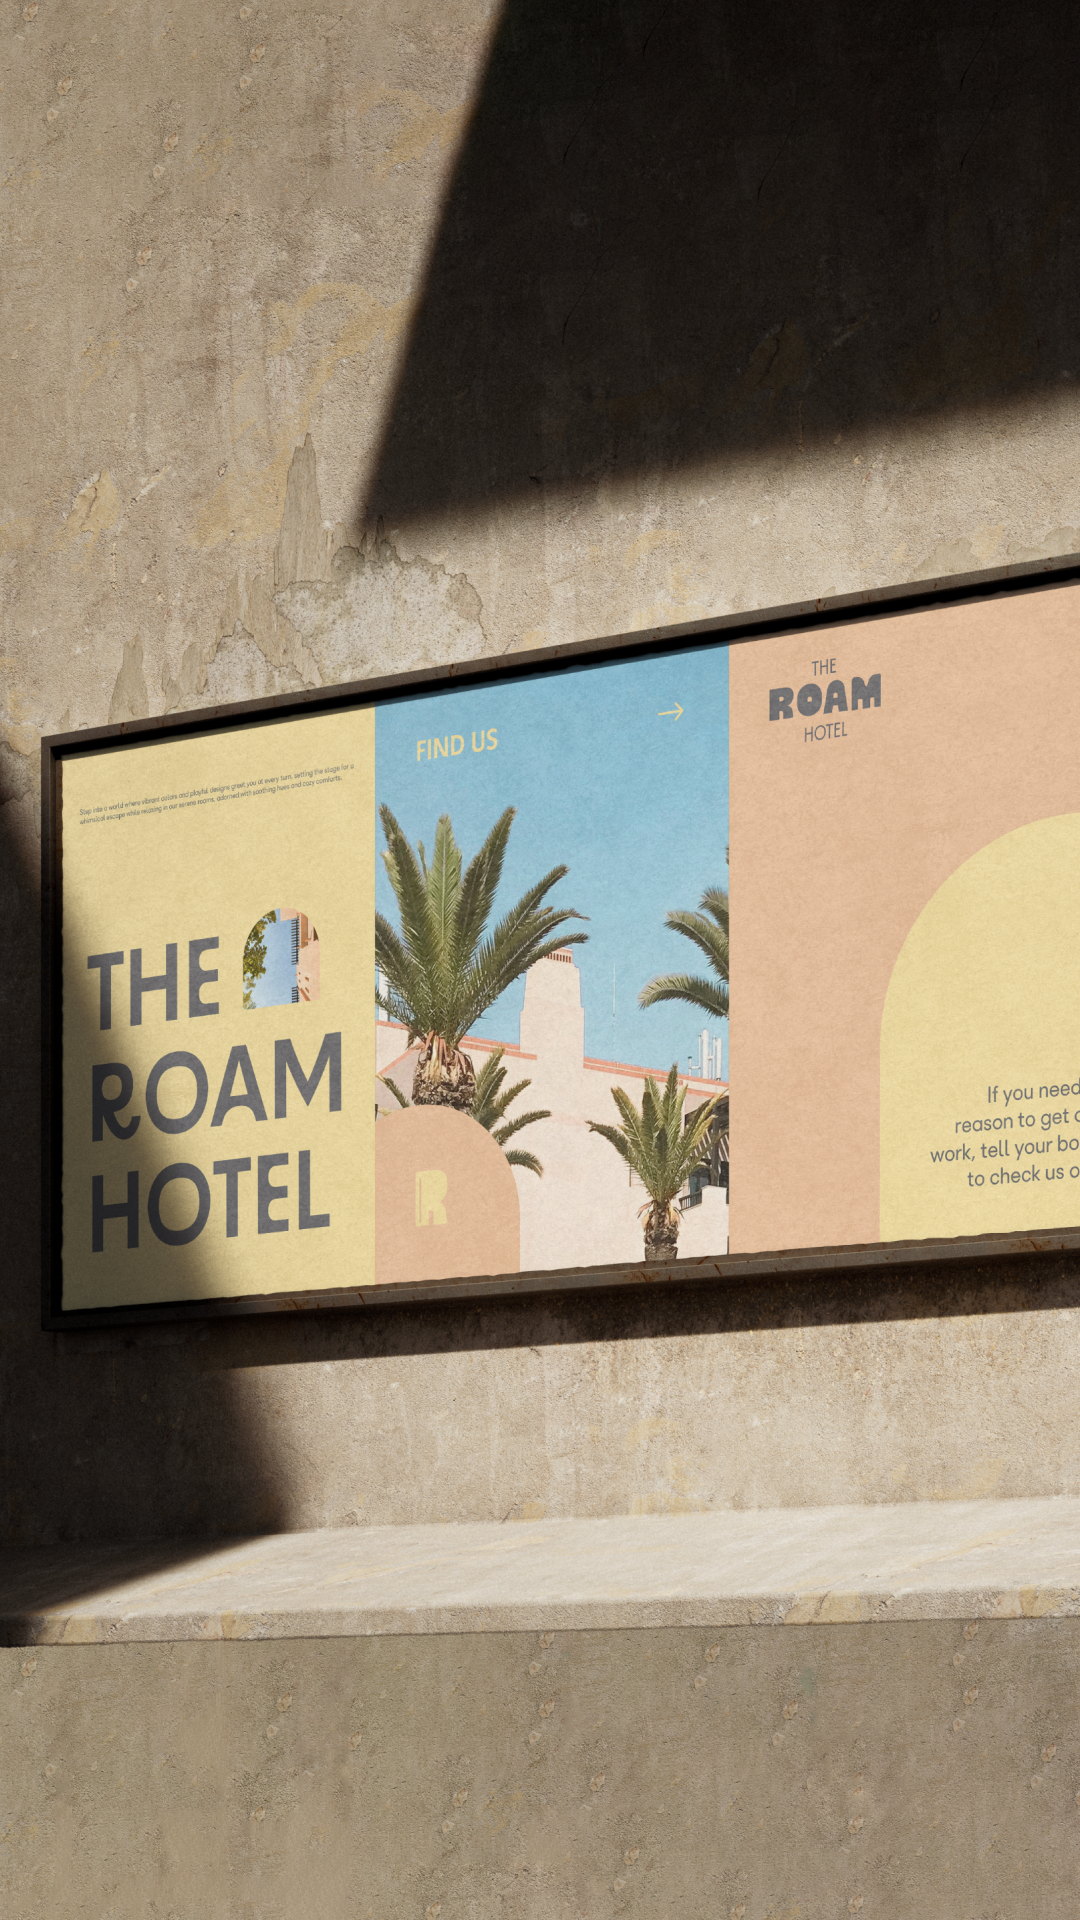 Fun boutique hotel rest and relaxation hotel branding design posters